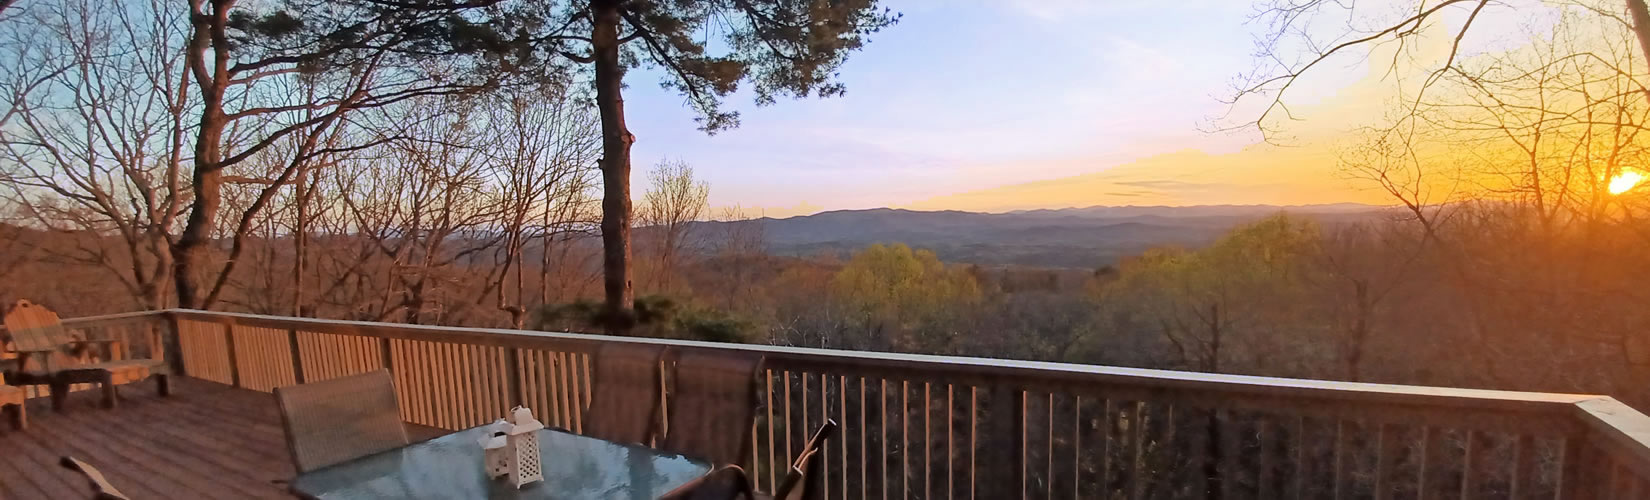 Welcome to the mountains where Appalachian Sky, a Big Canoe vacation rental home gives you 180° views and amazing amenities